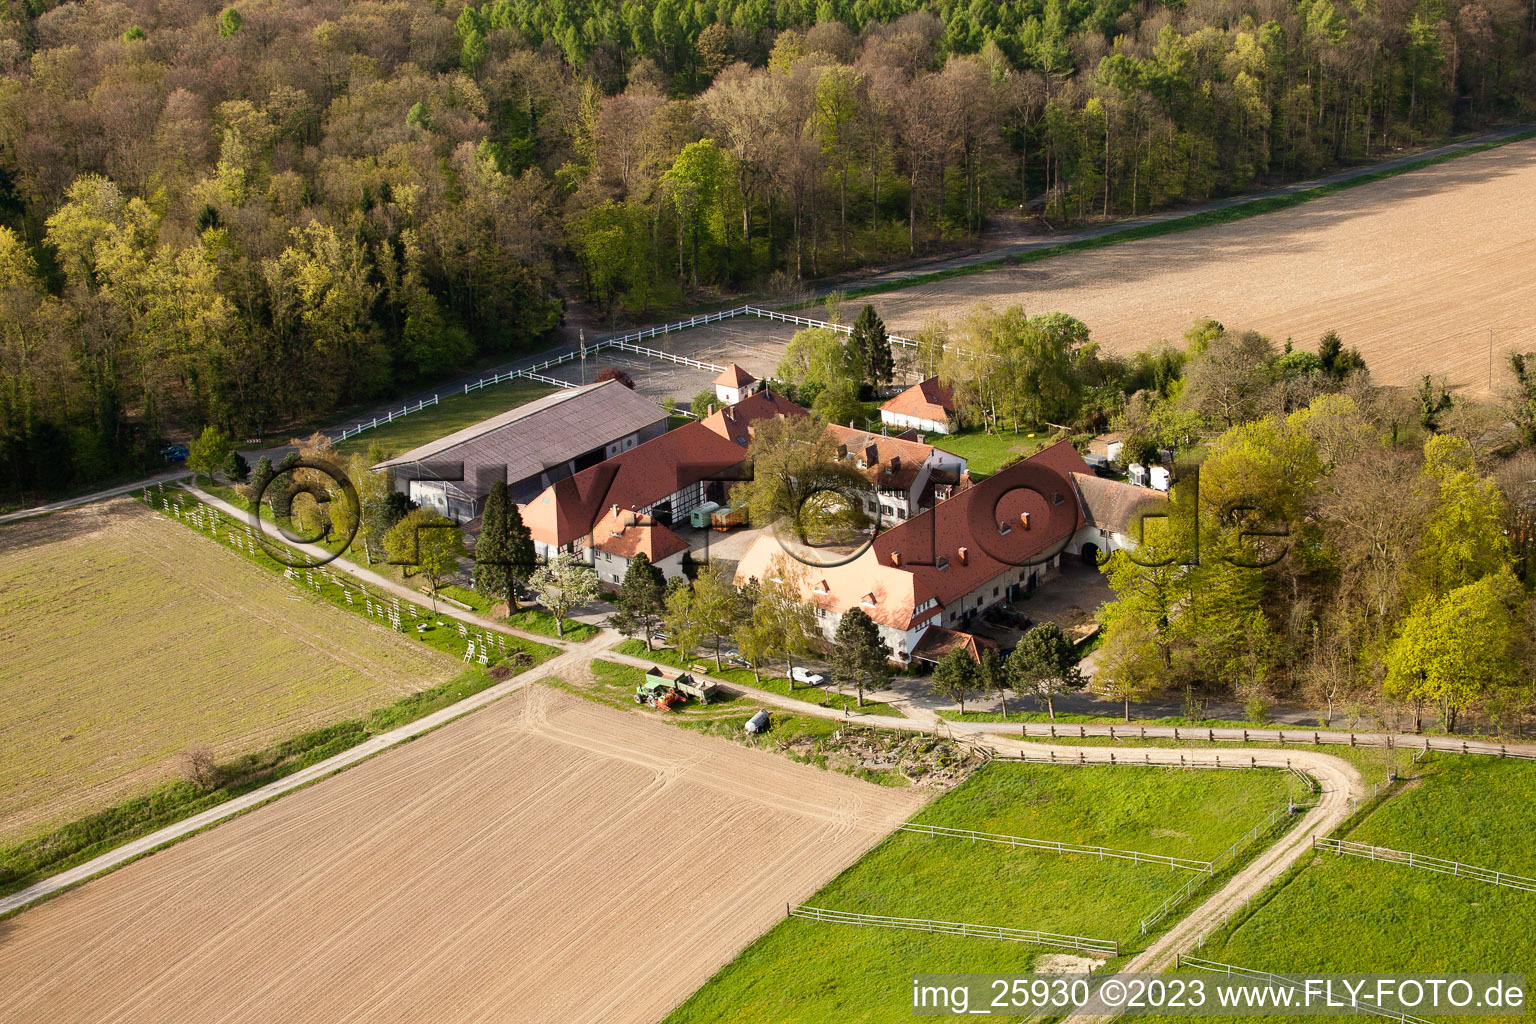 Rittnerthof in the district Durlach in Karlsruhe in the state Baden-Wuerttemberg, Germany seen from above